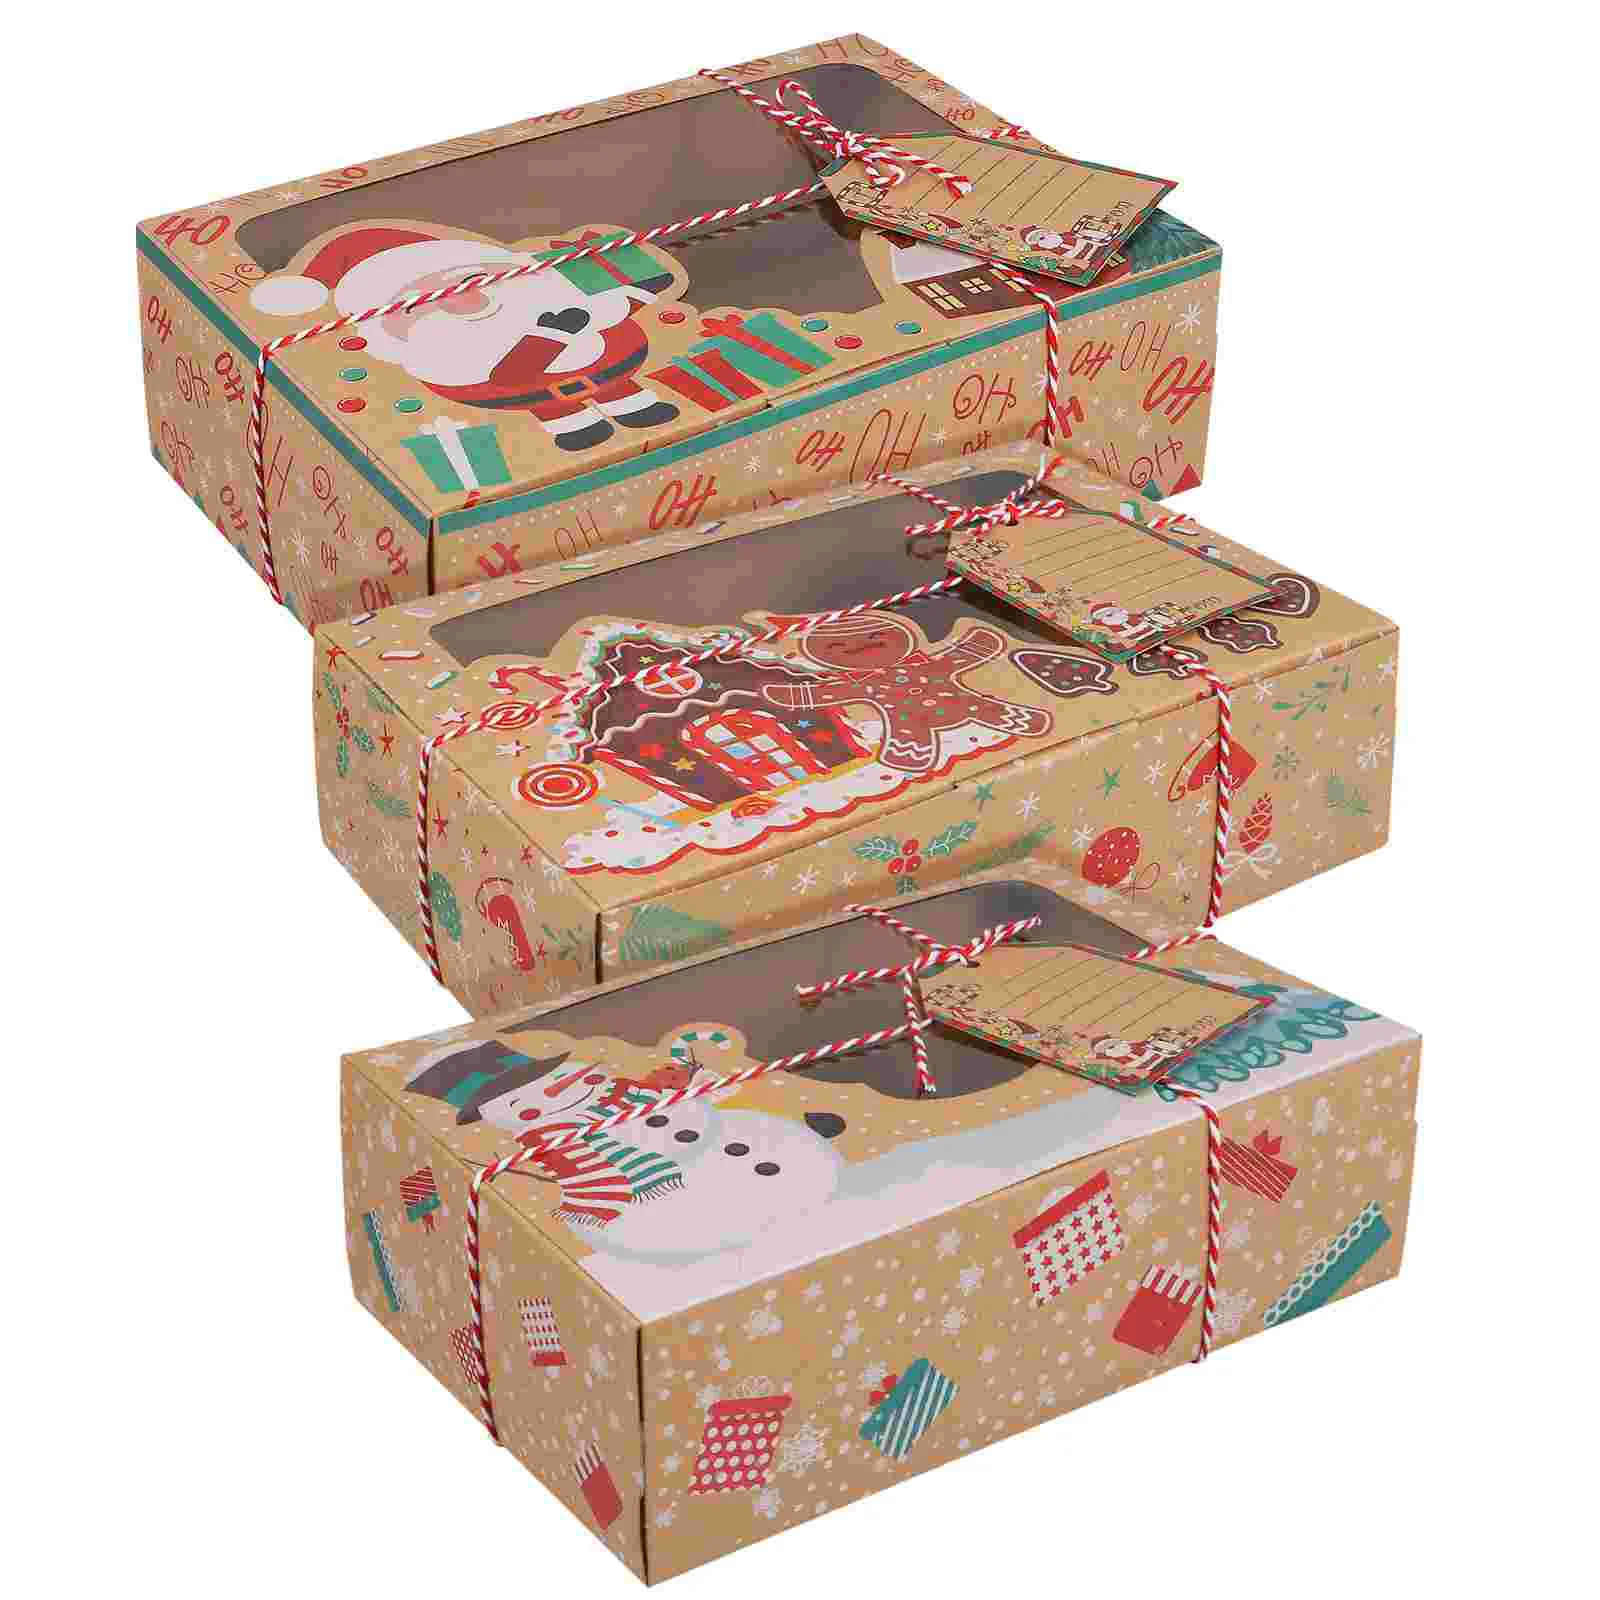 

PRETYZOOM 12pcs Christmas Cookie Boxes Portable Kraft Paper Candies Case Party Favor Holders with Rope and